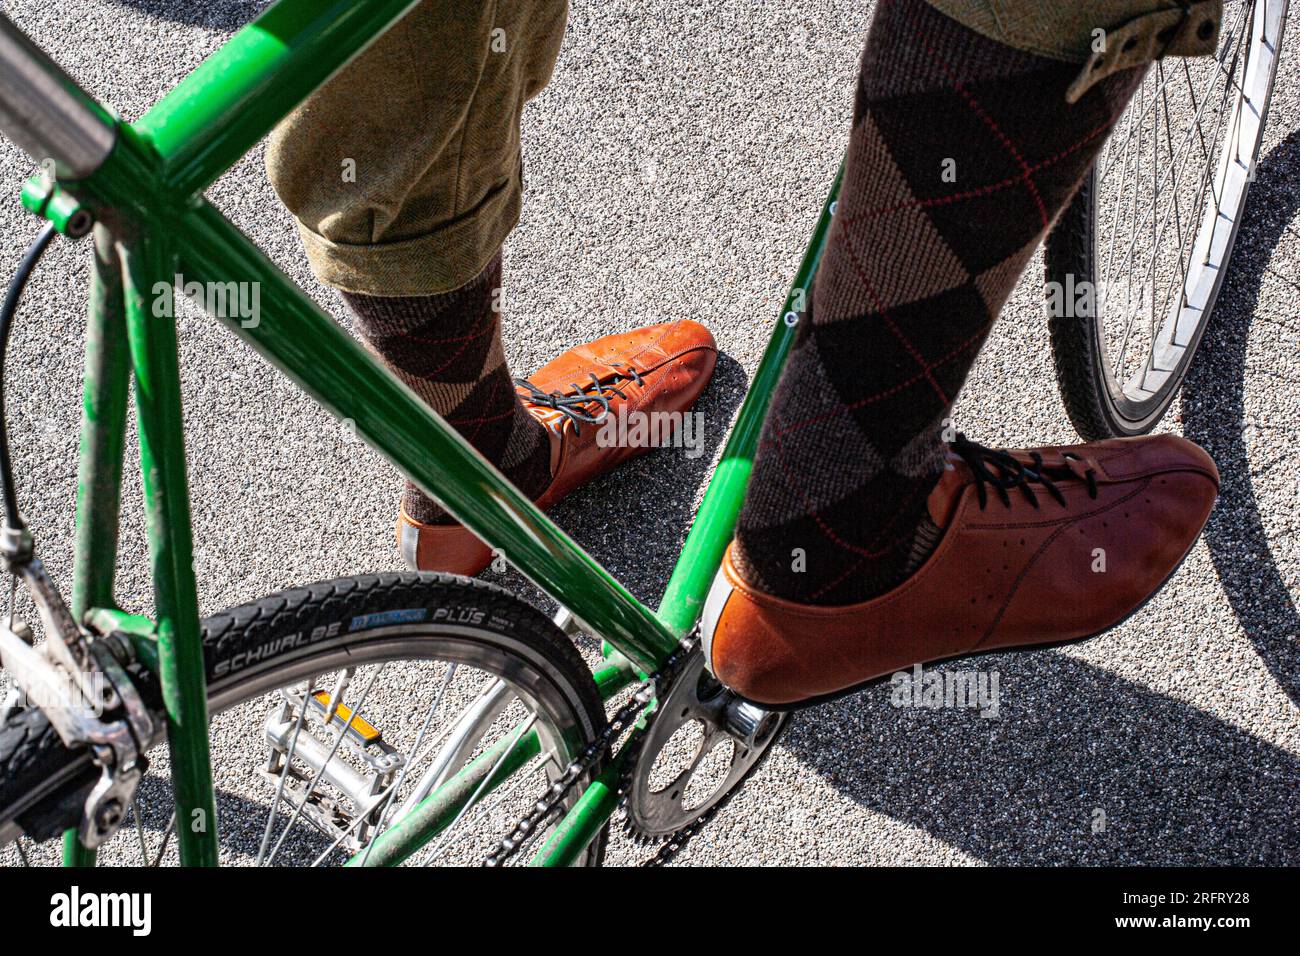 Tweed Run participant with Fix gear bicycle wearing knee length socks and cycling shoes , London, UK Stock Photo